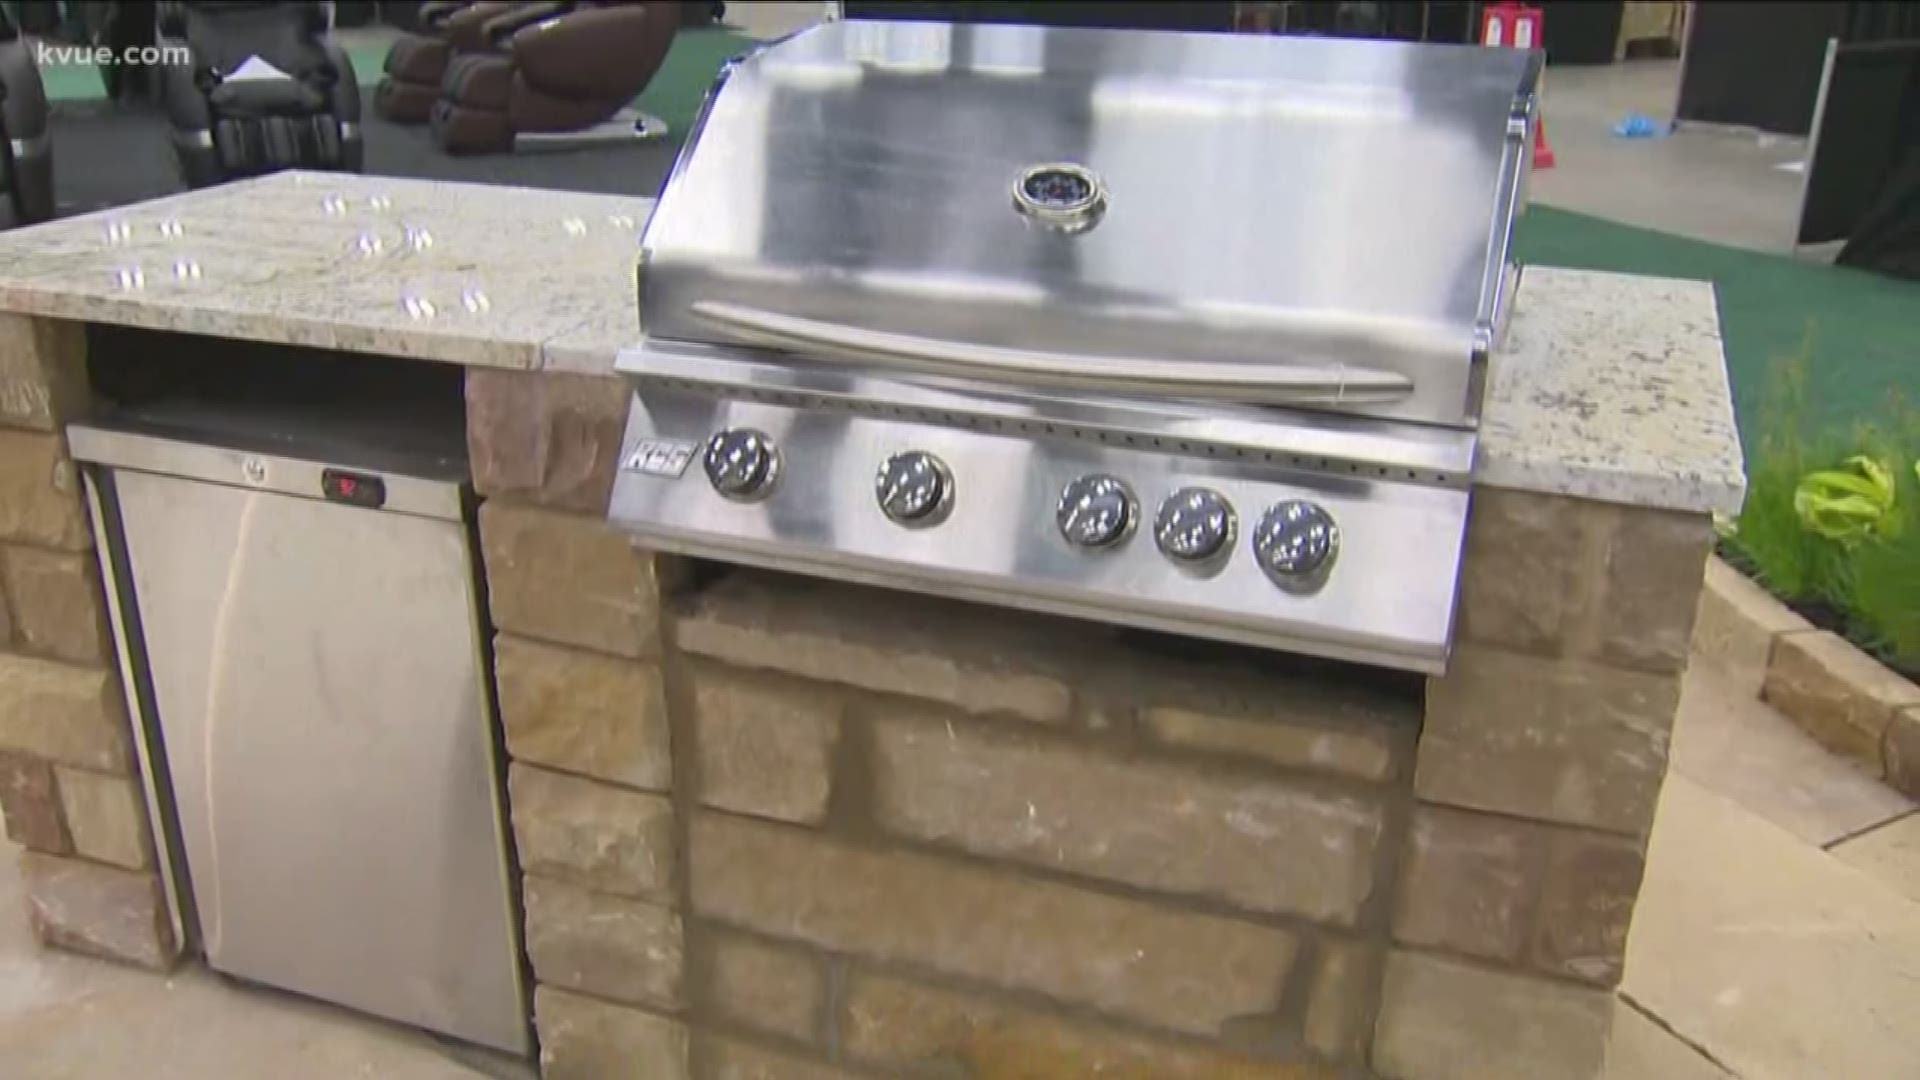 The 22nd annual Home and Garden Show is coming to the Austin Convention Center the weekend of Jan. 10.